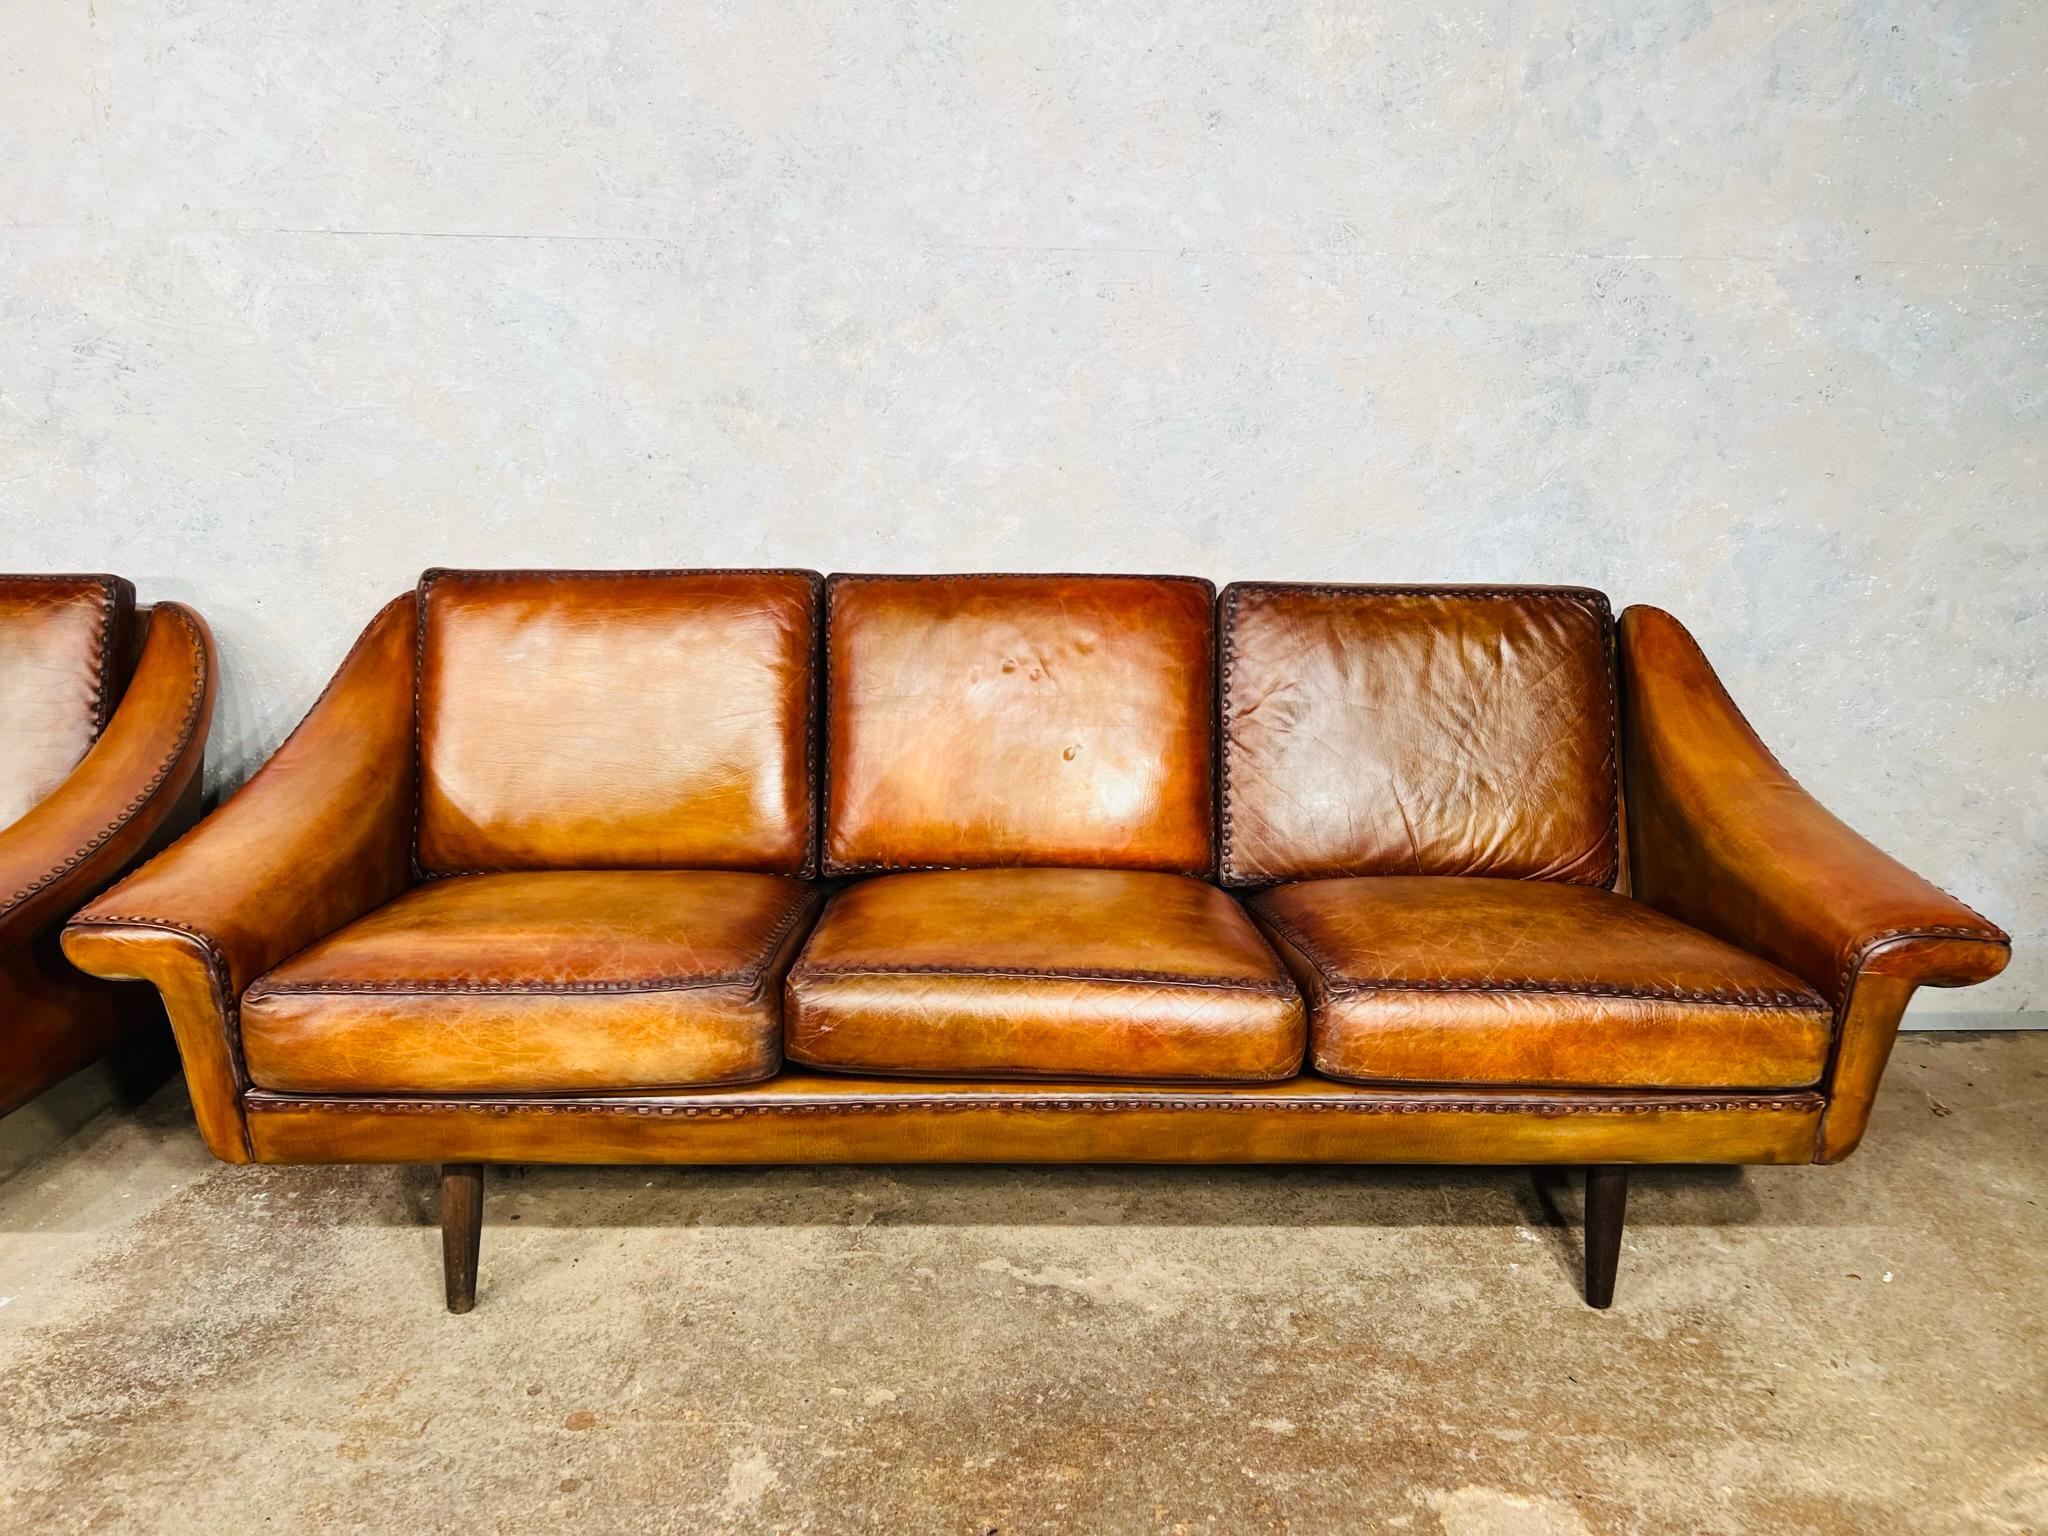 20th Century Pair Of Matador Leather 3 Seater Sofa by Aage Christiansen for Eran 1960s #642 For Sale